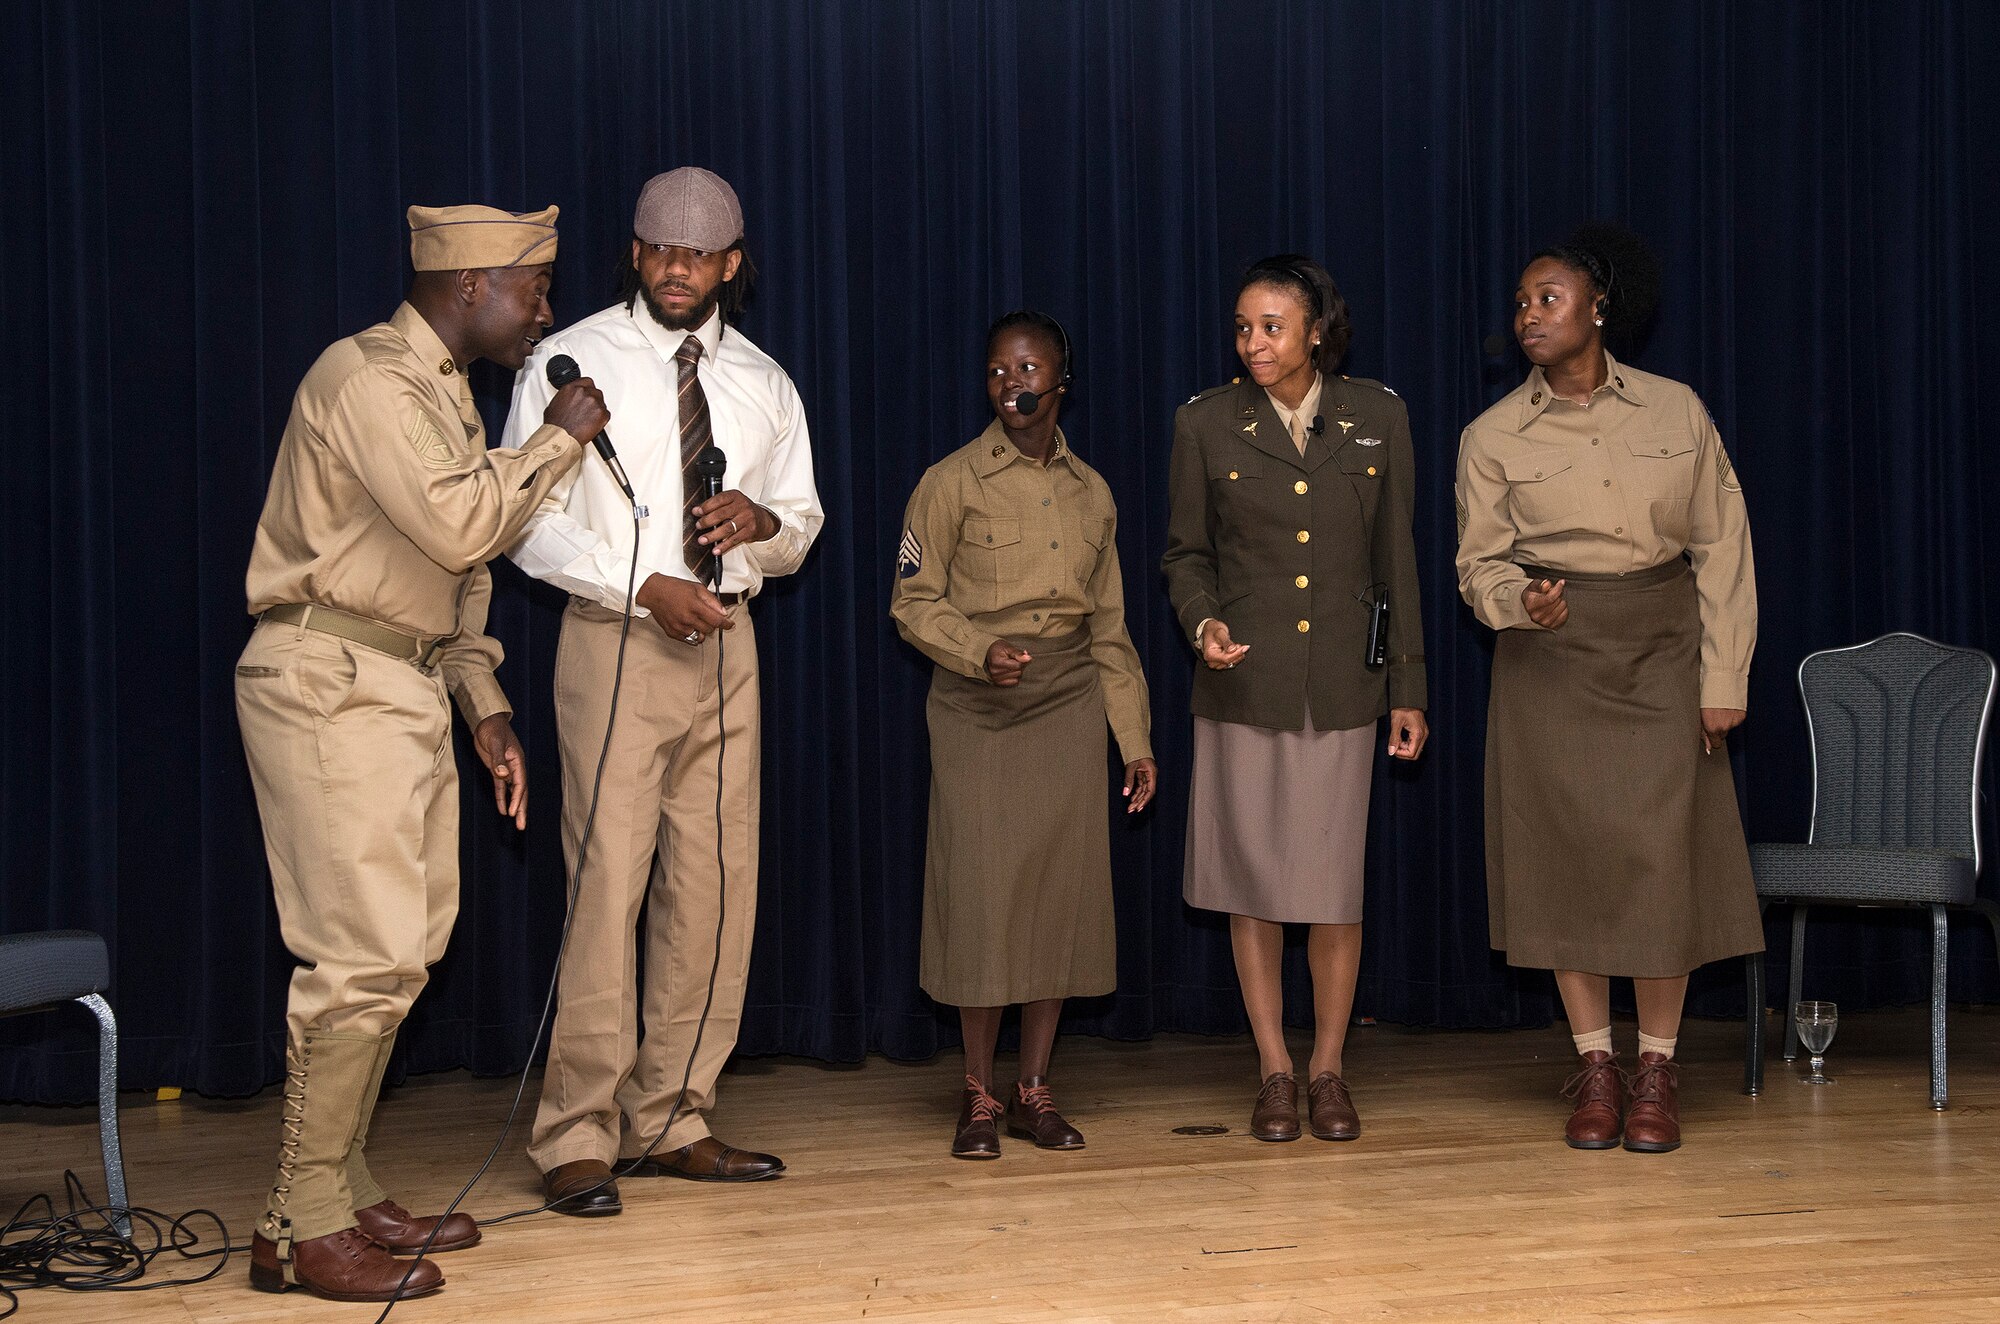 Members of the Lackland Performing Arts Group perform during the Tuskegee Airmen Tribute, June 12, 2015, at Joint Base San Antonio-Randolph’s Parr Club. Members of the JBSA-Randolph community celebrated the legacy of the first all-black unit by paying tribute to seven of the documented original Tuskegee Airmen members. The Tuskegee Airmen distinguished themselves during World War II with more than 15,500 sorties and 1,500 missions in Europe and North Africa and earned numerous combat awards. The event featured musical entertainment, comments by 12th Flying Training Wing leaders, an introduction of four Tuskegee Airmen present and a presentation of gifts to them. Members of the audience had an opportunity to mingle with the Tuskegee Airmen and listen to their stories. (U.S. Air Force photo by Johnny Saldivar)